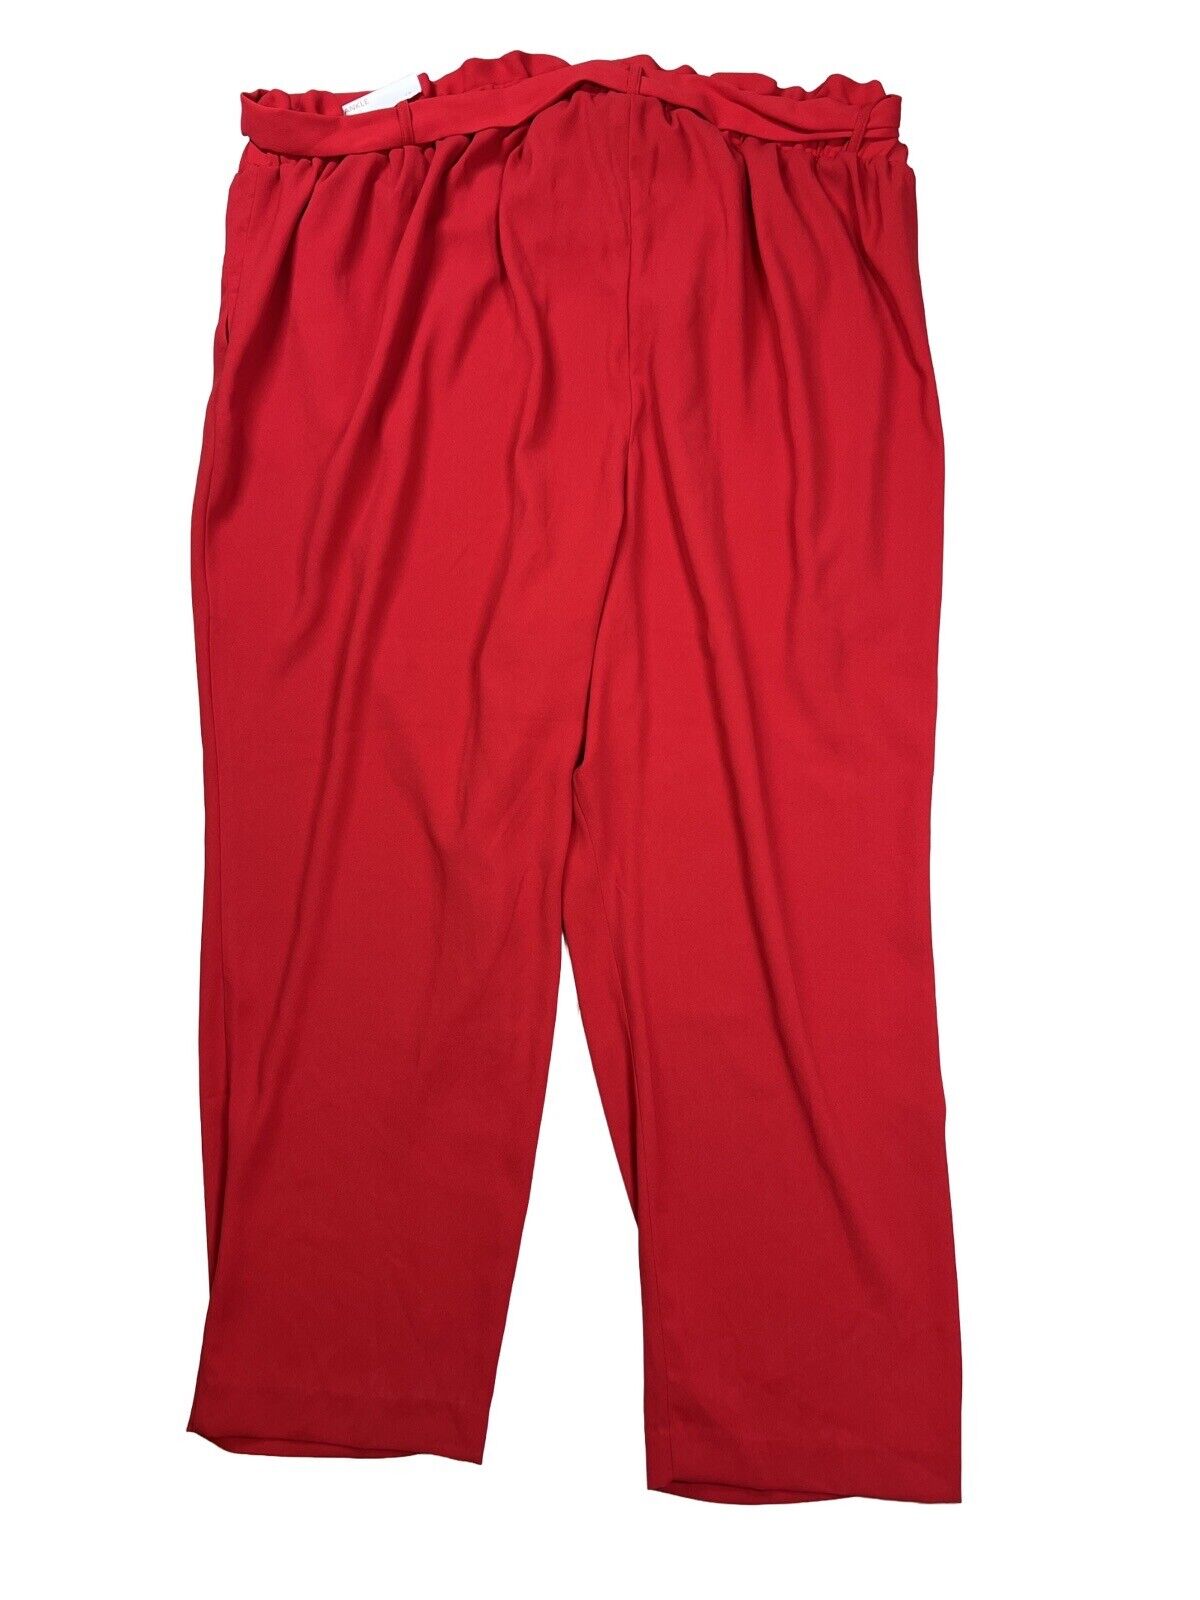 NEW Lane Bryant Women's Red Tie Front Ankle Pants - Plus 26